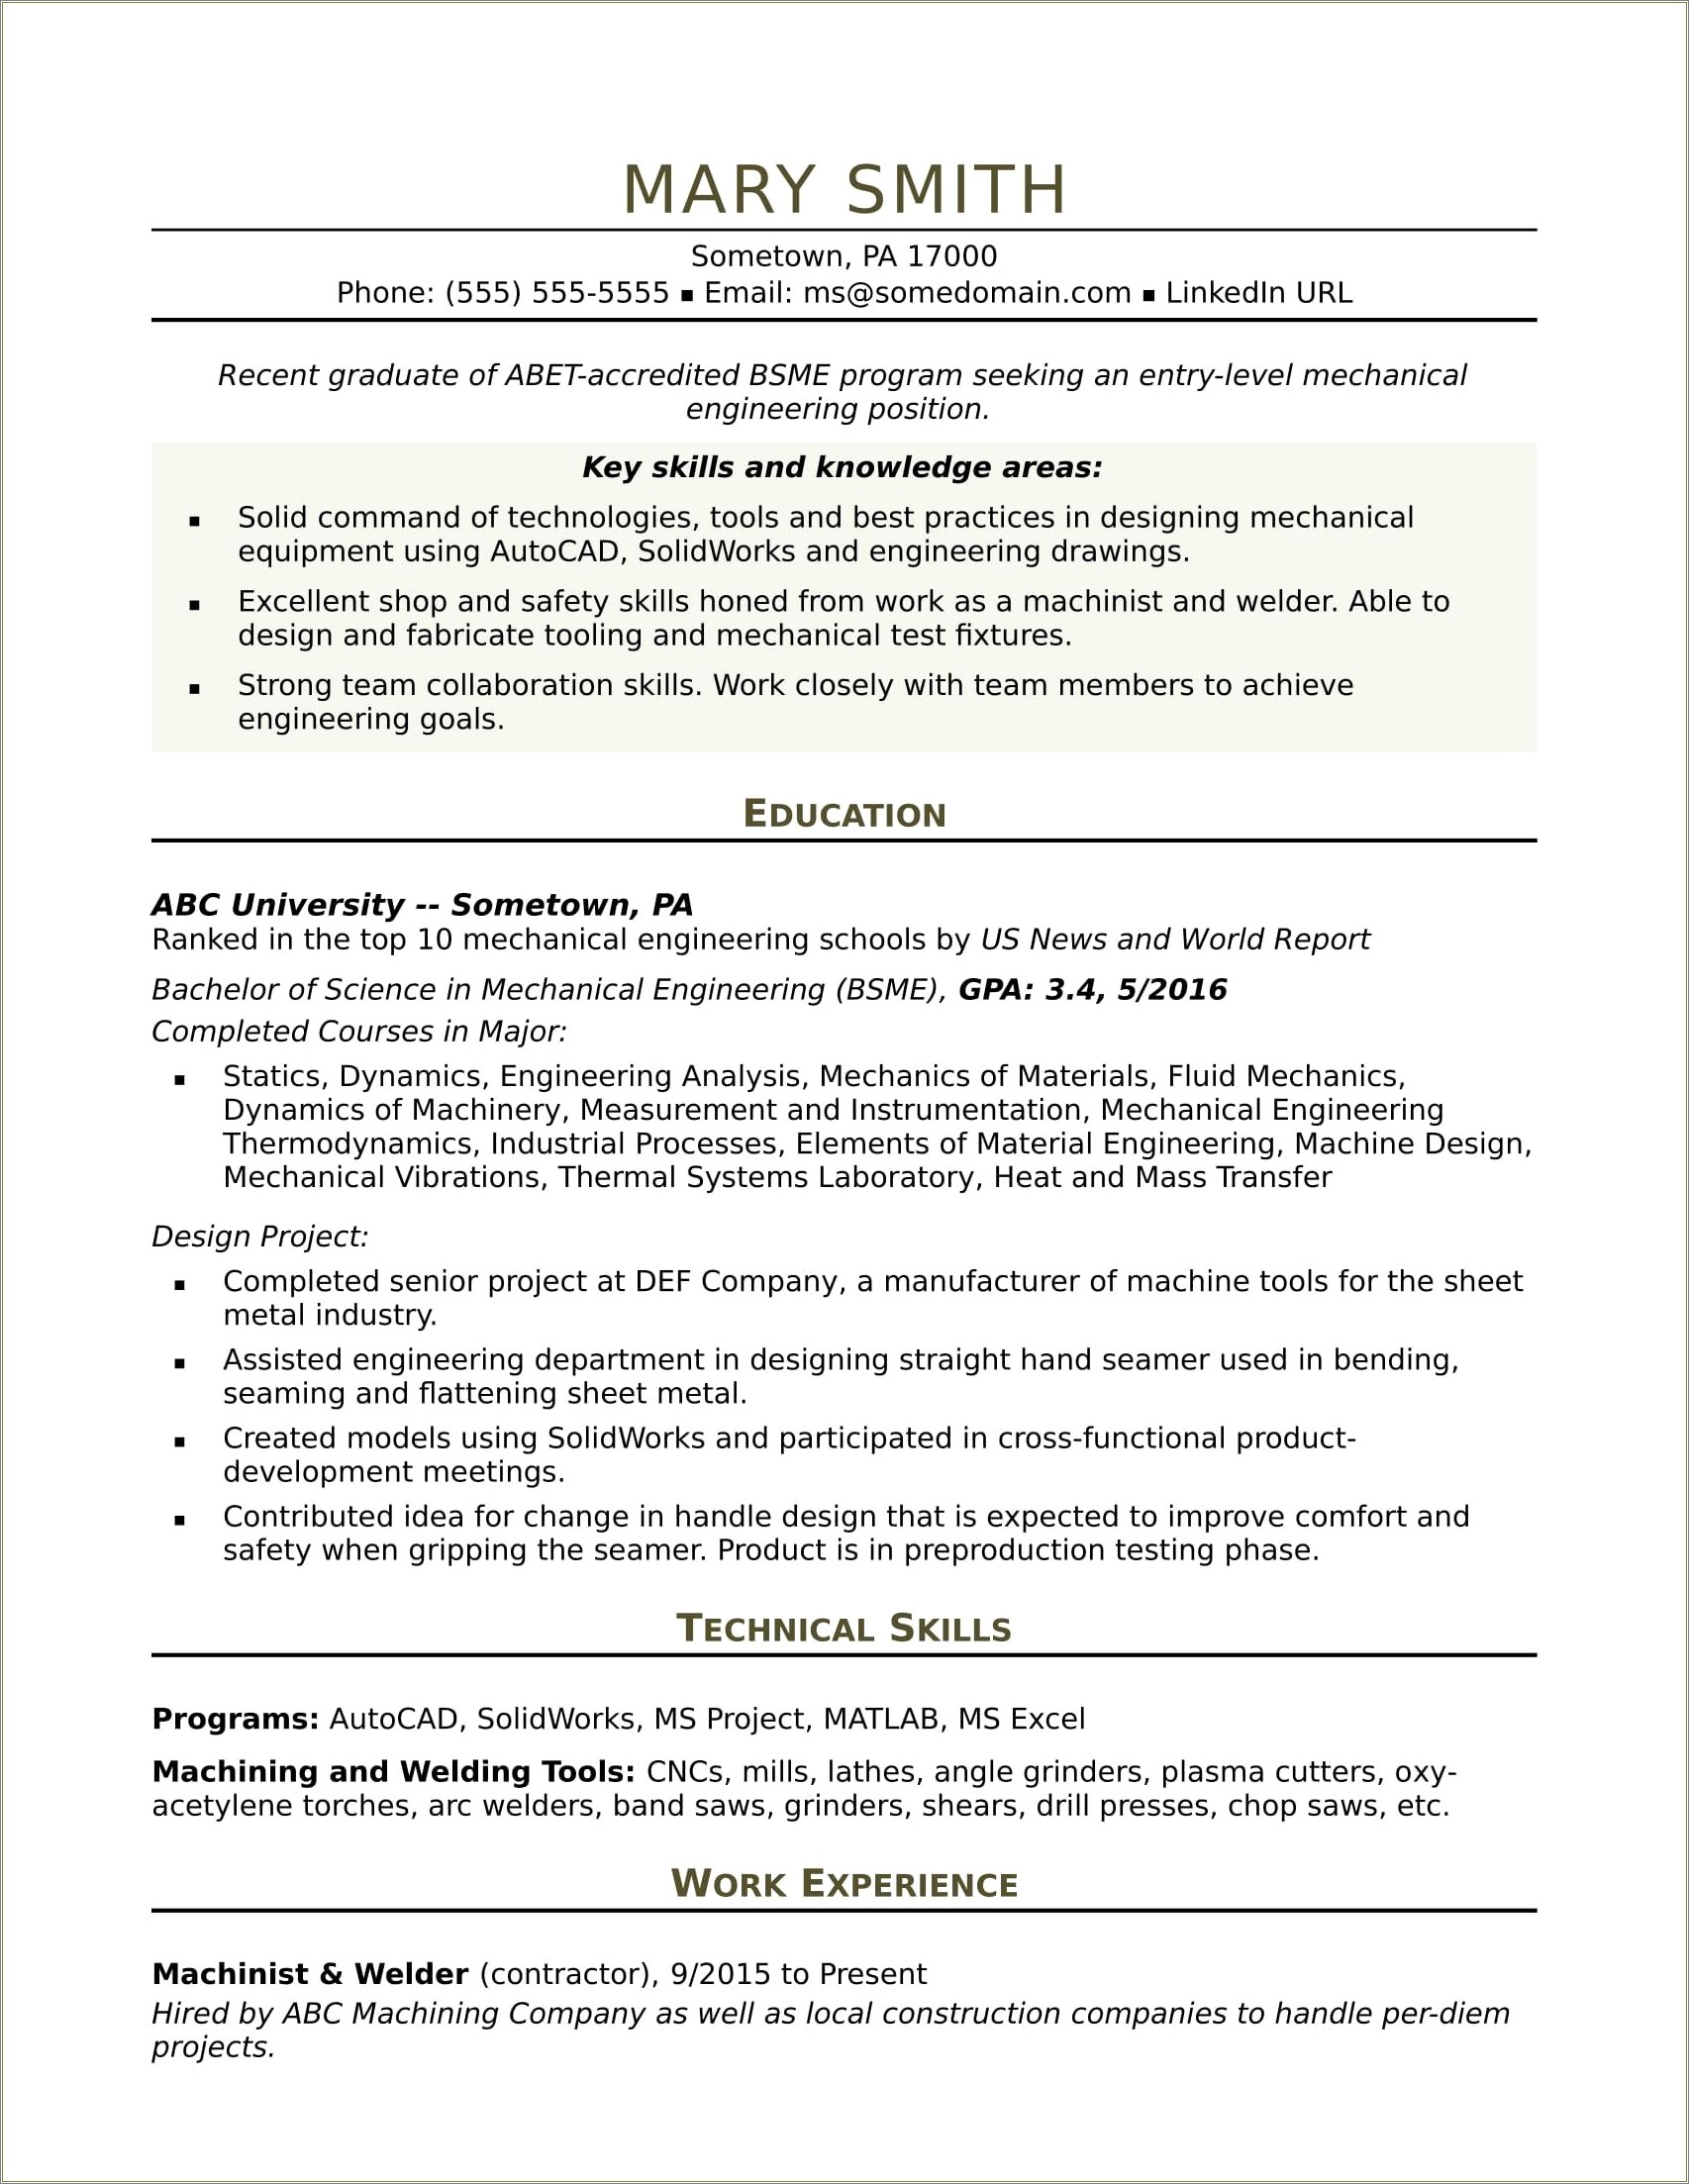 Resume For College Student With Little Work Experence